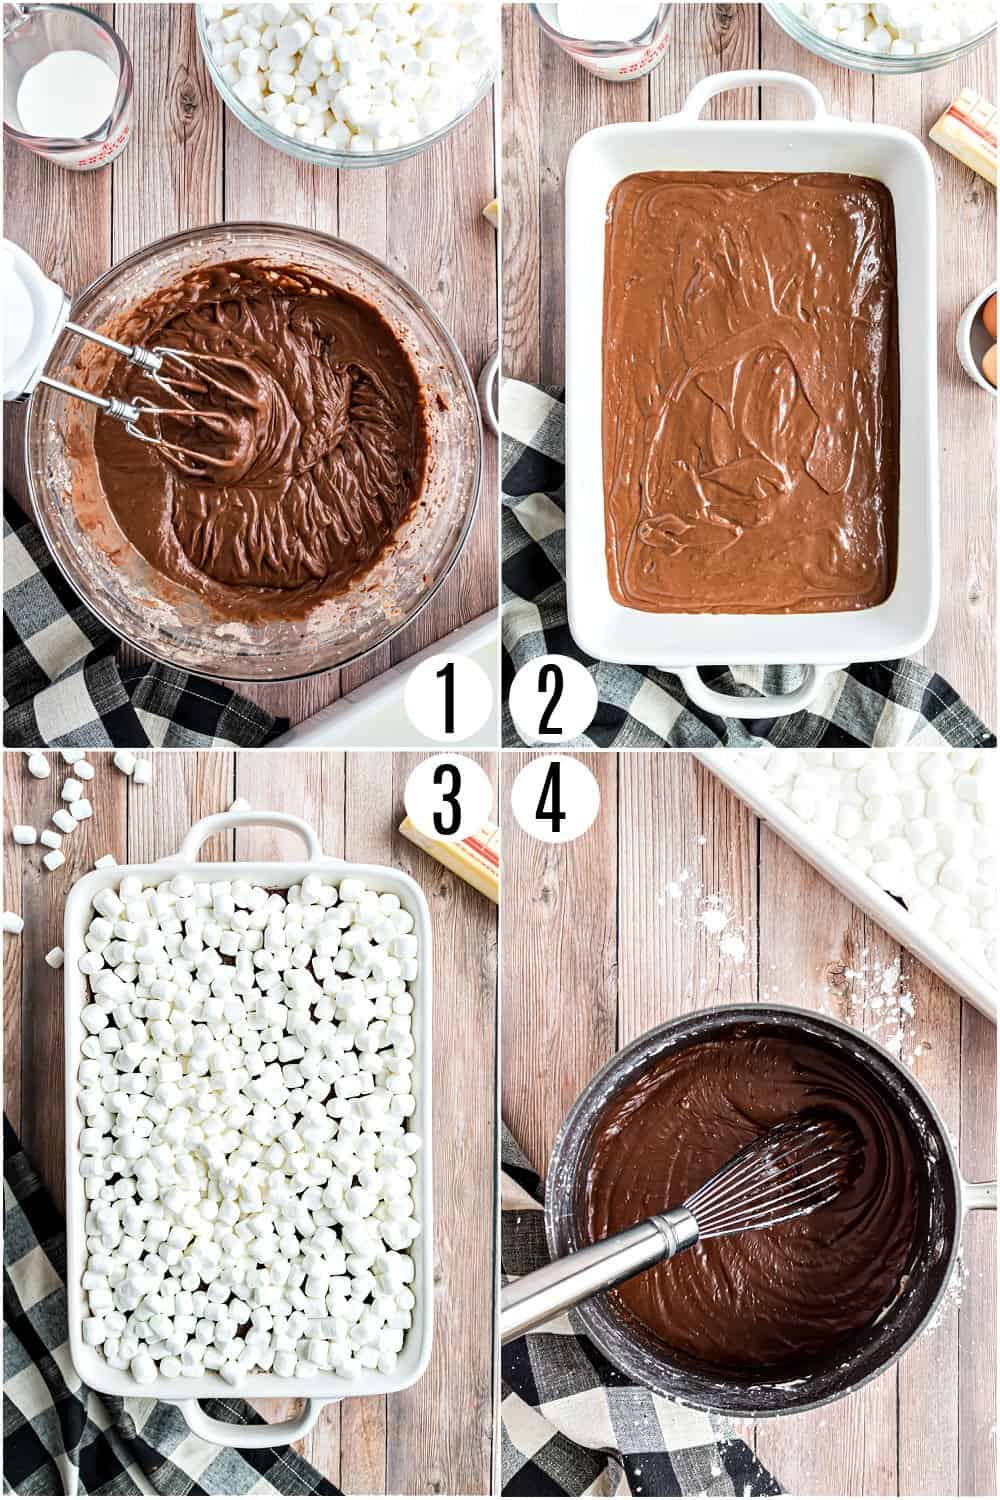 Step by step photos showing how to make mississippi mud cake.